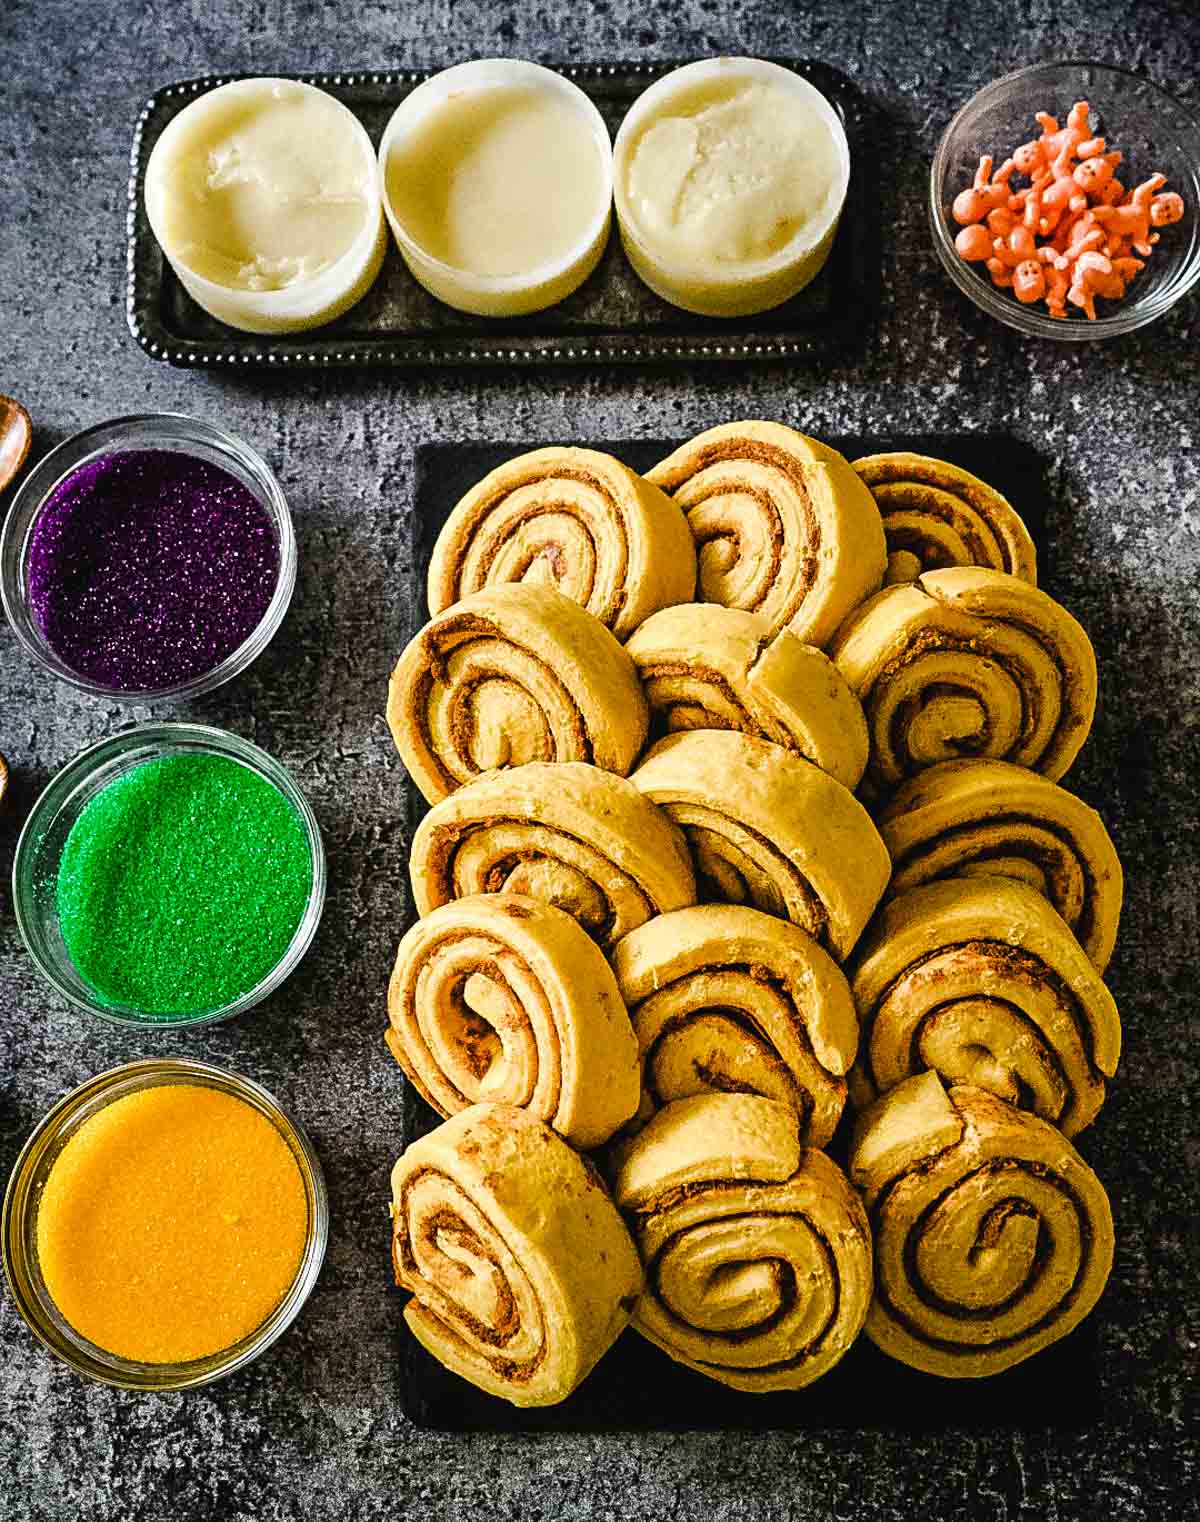 Image of easy king cake recipe ingredients: canned cinnamon rolls, icing, purple, green and yellow sugar, and toy babies.